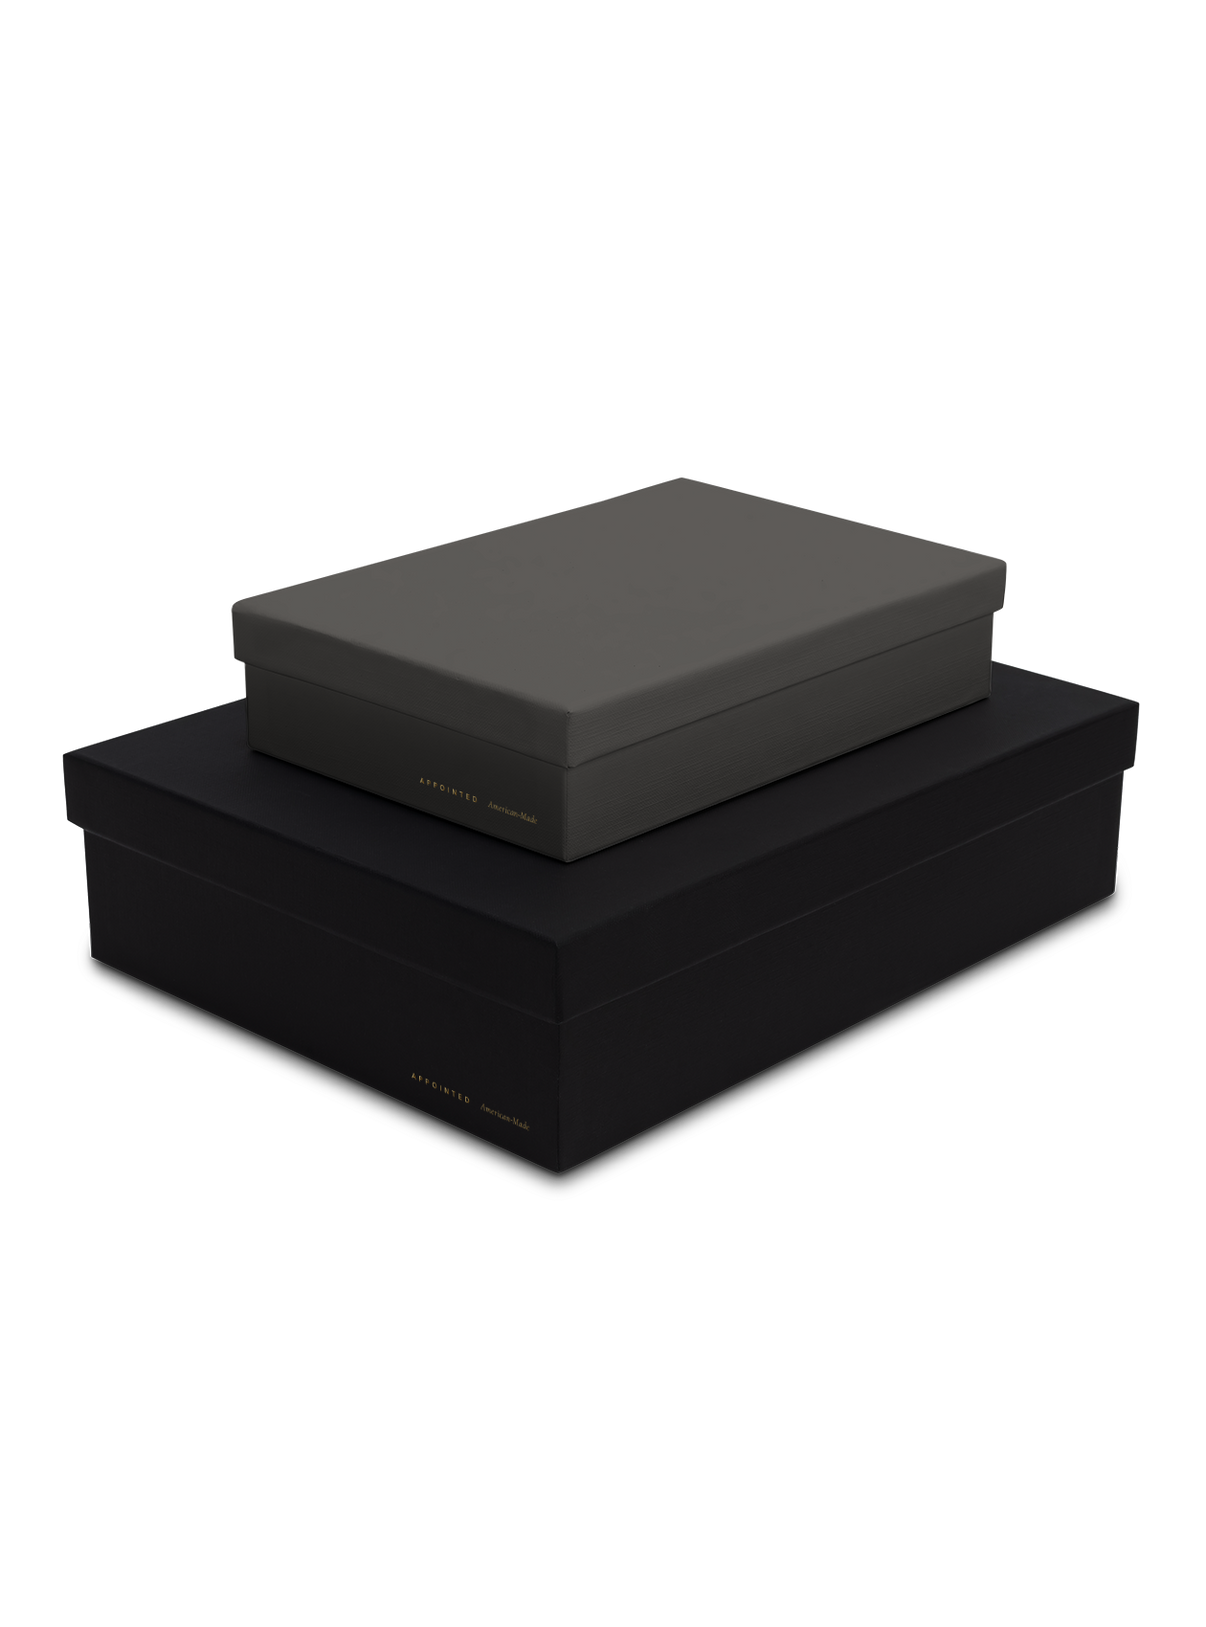 Diagonal view of smaller slate box stacked on top of a bigger charcoal box, both with gold foil details || Onyx and Slate